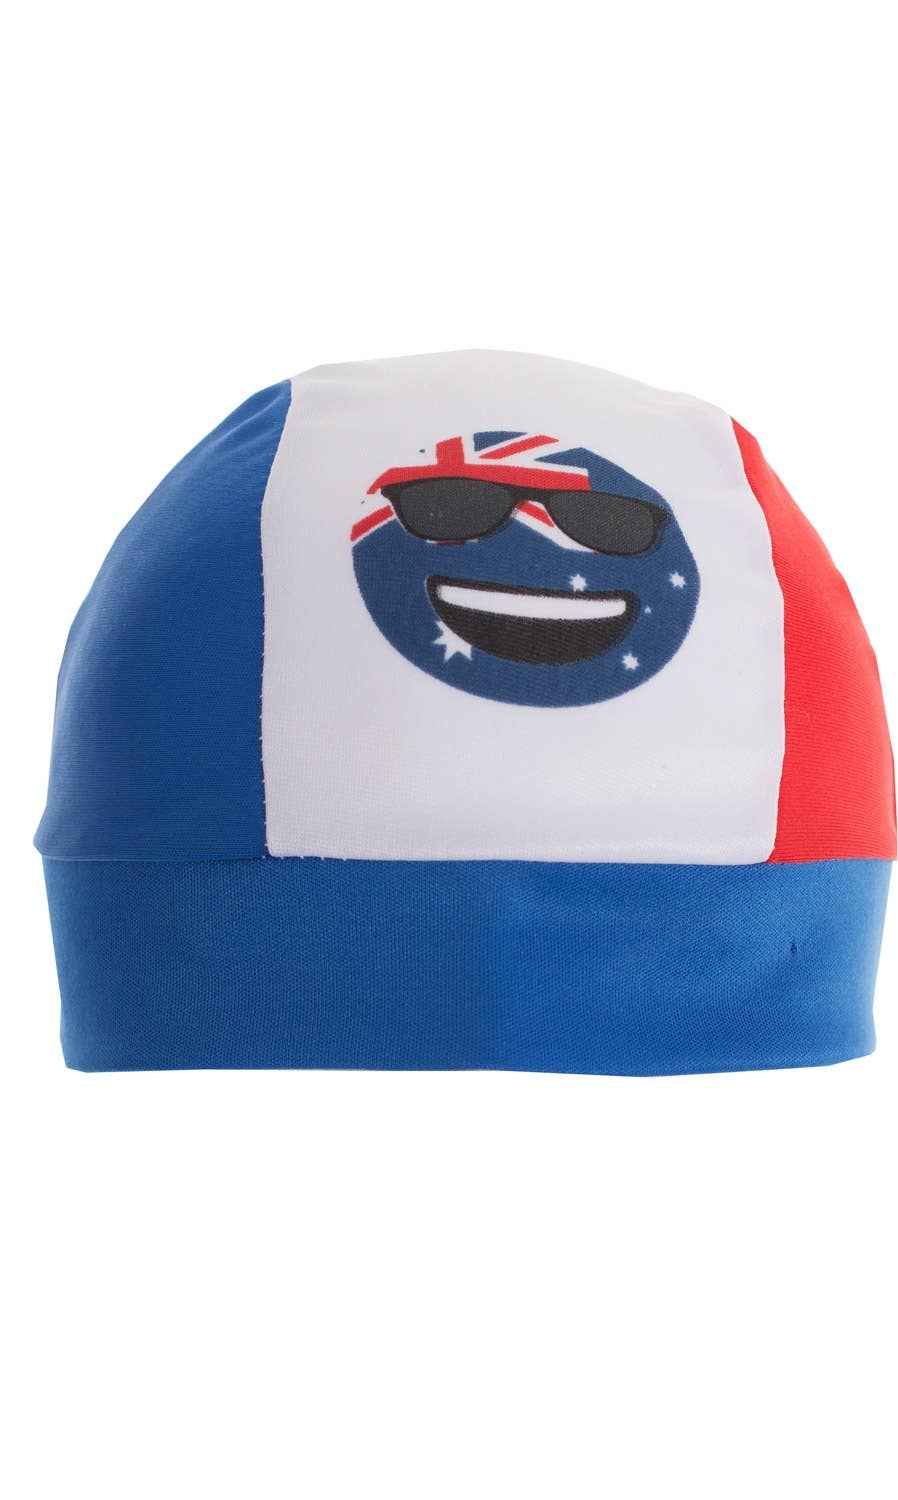 Australian Red White And Blue Novelty Bandanna With Sunny Cool Dude Emoji And Australian Flag - Front View